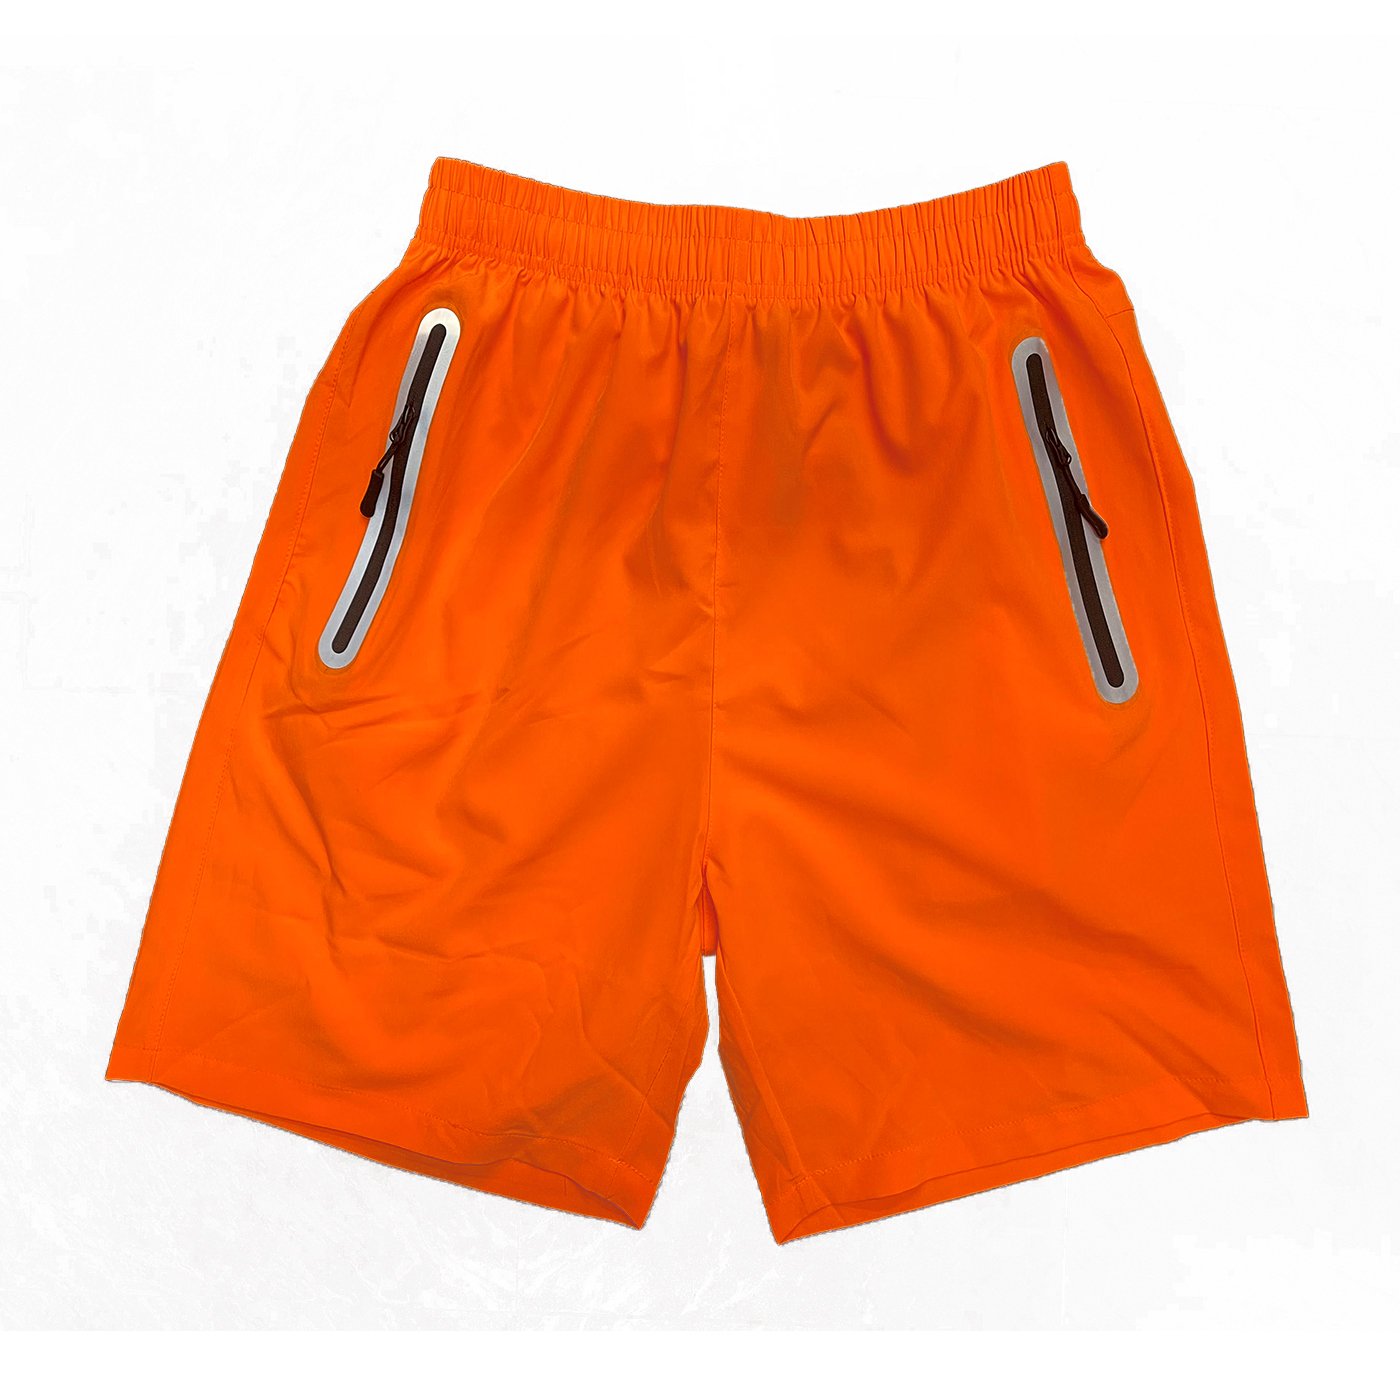 Picture of a Men's Performance Orange Running Shorts front view